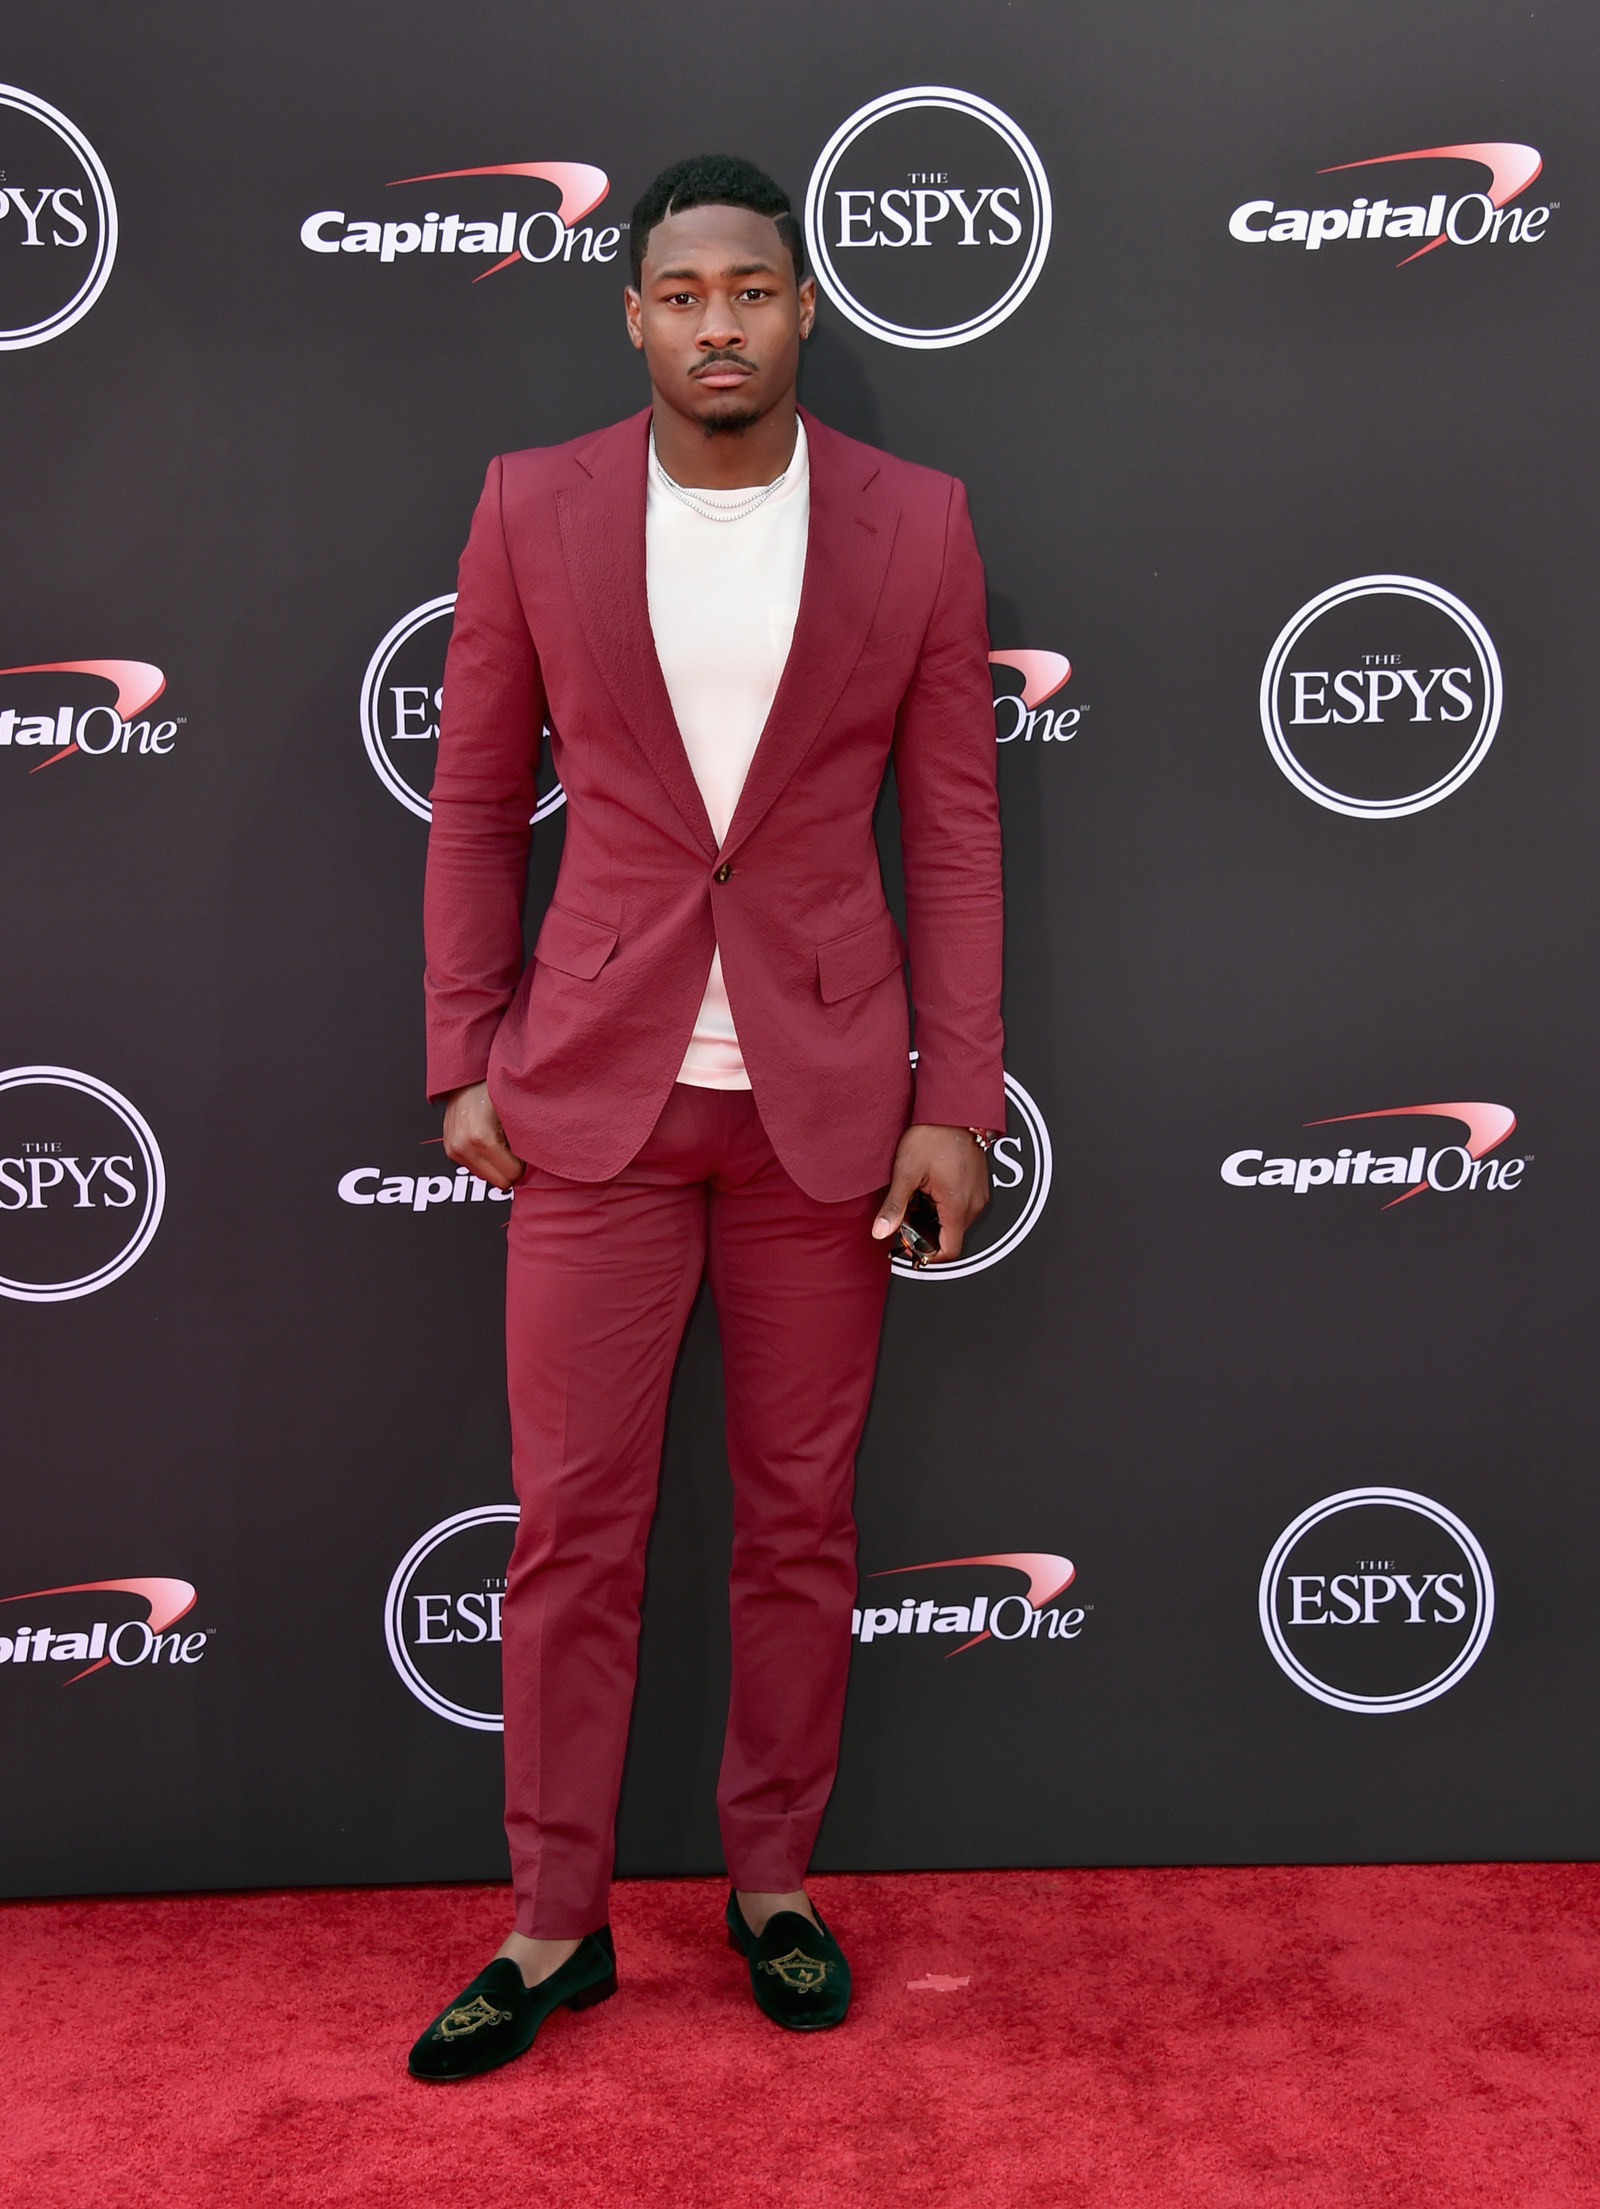 Hosted By Danica Patrick, The 2018 ESPYs Brought Out Your Fave Athletes And Celebs1600 x 2209